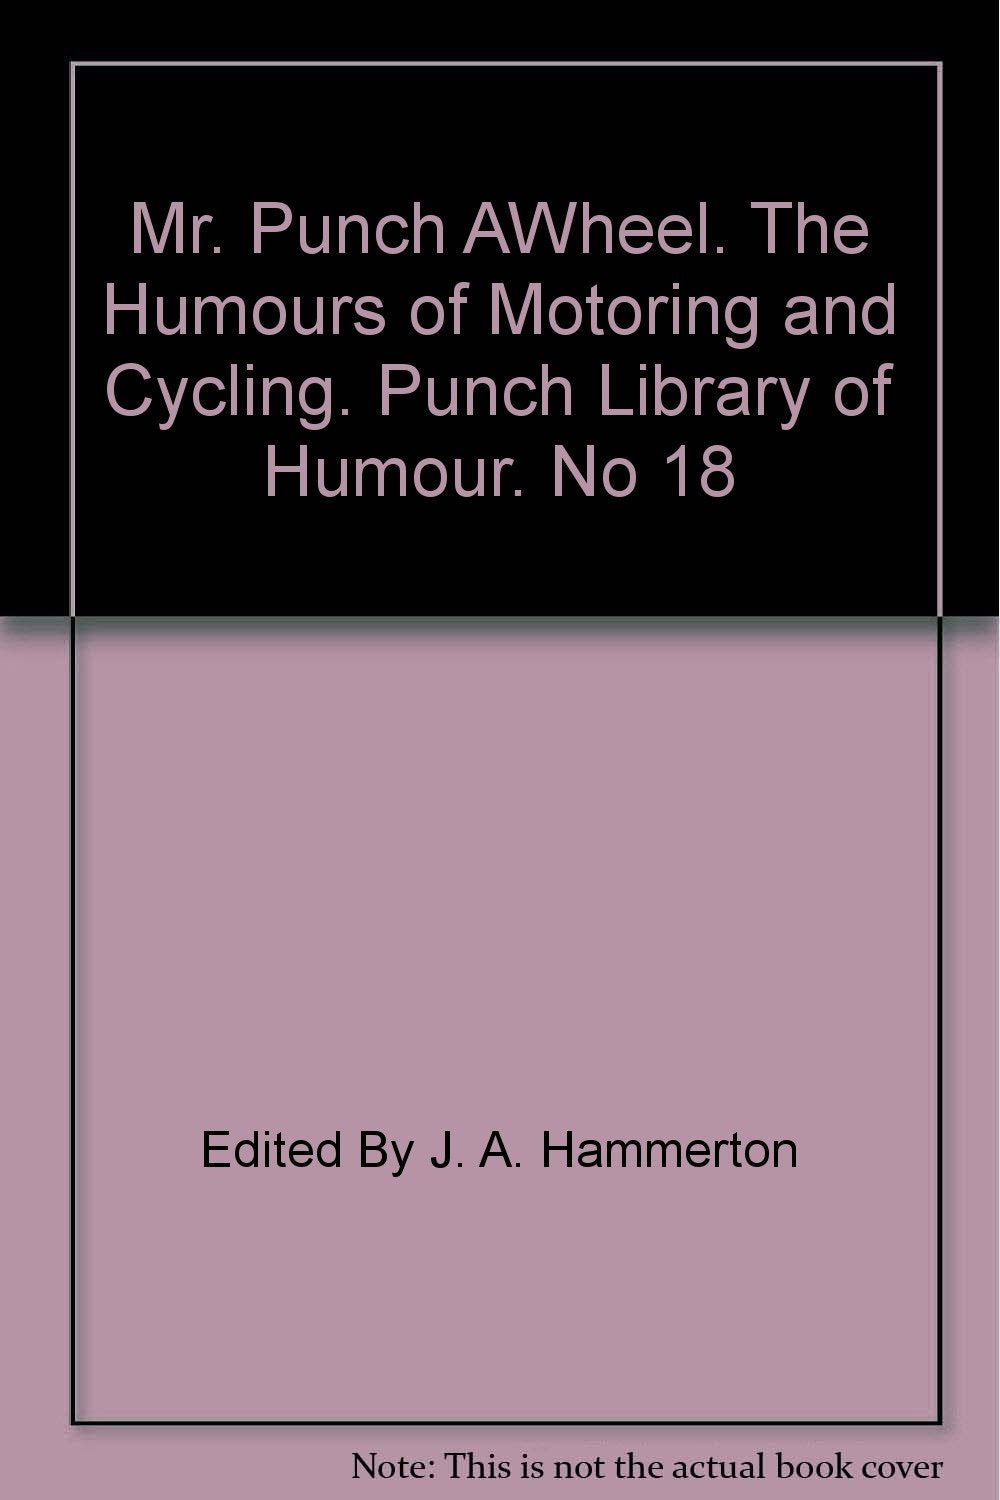 Mr. Punch AWheel. The Humours of Motoring and Cycling. Punch Library of Humour. No 18 [Hardcover] Edited By J. A. Hammerton and Various